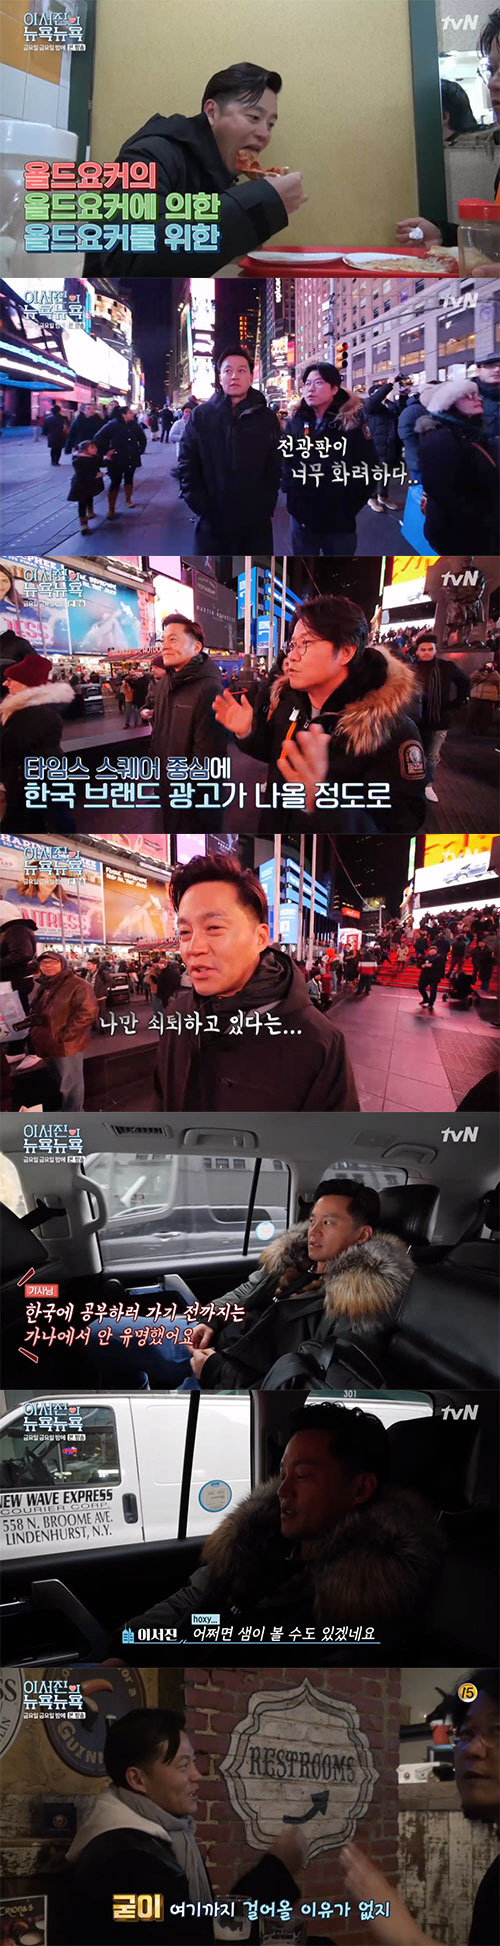 Friday night ended with A Pharase.On the 27th TVN Friday Friday night, there were a lot of scenes that had laughed at viewers, and the unseen broadcasts were released and left a deep lull.Lee Seung-gi, who has been to Factory of Experience Life 10 times on this day, said, We have returned as if there is a grace period.If you have to shoot a 19-gold movie related to the cockle in the first Factory, the cockle factory, Lee Seung-gi should wear only panties and go into the water, said PD.Lee Seung-gi said, I can not forget the praise I heard in the second Han and Factory. As for the third cheese factory, I can not forget Mr. Lawrence.I did not see it, but I remember a lot. In the cheese factory, Lee Seung-gi enjoyed a massage chair with his senior and said, I should not eat cheese secretly.As for the laundry factory, It was a white hell.I thought I was too horny or junior to edit, he said, and Lee Seung-gi and my juniors who were horned in the laundry factory were released and attracted Eye-catching.Lee Seung-gi, for the glove Factory, said: It was inception; then I still couldnt find the top, attracting Eye-catching.Lee Seung-gi, who received a house of his pet dog in the house factory, laughed, saying, Pepero is afraid to go there.Lee Seung-gi cited Juk-yat as the best master: Dr. Juk-yat was like a real master; and as the best fellow, he is the head of the calves.He treated me with love, she said.Finally, Lee Seung-gi said, I have finished the factory in the tenth series. It seems that my reliability has risen because my seniors and craftsmen are running on the front line.Thank you, he said.Next, in My Friends Recipe, which is very special and secretive, Jin-kyeong Hong said, I will release the unbroadcast part that I could not disclose because it was broadcast 15 minutes.My Friends Recipe was taken by the production crew in advance, and the mothers laughed at the appearance of the unsettled.In particular, Kim Young-chuls mother laughed at her daughters tit-for-tat.In addition, the mother of the comedian Yoon Sung-ho laughed when she showed a bibimbap in her mouth unlike the intention of the production team, and the production team praised her mother who was good at talking, saying, I can go to the food program.Nam Hee-Seoks father boasted a tremendous cut, saying, It makes the Chinese restaurant go old and it makes me sick. He also showed a secret soy sauce secretly to the production team and attracted Eye-catching.In addition, Nam Hee-Seoks mother and father laughed with a disagreement by putting a beat.Jessies mother said, I like the Factory of Experience Life better. She laughed at the viewers by saying, If you need licorice next to Jin-kyeong Hong, please call me if you need it.Lee Seo-jin at Lee Seo-jins New York City New York City revealed jet lag adaptation and memories at amusement parks.Lee Seo-jin released a huge amount of knowledge related to the film, especially Lee Seo-jin, who said, I met Johnny Depp at the New York City Department Store.I couldnt take pictures because I didnt have Camera at the time. So I saw what Johnny Depp was buying and he bought a luxury suit.I came to Nicholas Cages birthday party wearing it. Lee Seo-jin also memorized the birthdays of Hollywood Actors, and Tam Cruise boasted of his knowledge of seven octaves.Lee Seo-jin ate memories from New York City to Chinatown, and was shown eating pizza house spaghetti for unreleased broadcasts.Especially, meatball spaghetti meatball was the size of a billiard ball, and it laughed.Lee Seo-jin and Na Young-Seok PD made a meal bet at the dim sum house, and eventually Lee Seo-jins victory revealed Na Young-Seok PDs calculation.Tukha Na Young-Seok PD said, Do you not see Times Square or musicals? And then he was angry with Lee Seo-jin, and eventually the two headed for the Times Square in New York City.Lee Seo-jin laughed, saying, Ive never been here before.Lee Seo-jin said: Twenty-five years ago, our home appliances started coming in, the cheapest.Our products are raising their status, and I seem to be declining. Lee Seo-jin and Na Young-Seok PD headed from Manhattan to New Jerseys jjimjilbang, and the knight said, Its not Sam OHermie, and Lee Seo-jin said, Its famous.Oh said he wanted to be president. The knight said, Maybe if you come out, you will be elected. Even the knight caught Eye-catching by revealing that he had a relationship with Sam OHerrie since he was a child.Finally, Professor Yang Jung-moo of The Wonderful Art Country and Professor Kim Sang-wook of The Wonderful Science Country had a special fun.On this day, I had time to solve the curiosity of viewers.Viewers can define art and science as love, It is hot as you go up to the sky, How to memorize science easily, Do you need to memorize the jugging rate chart, Explain quantum mechanics so that Eun supports can understand, Why is giraffe tongue blue,  the most prized piece of work you have.Do you feel like a work? and other absurd questions were poured out.Professor Kim Sang-wook and Professor Yang Jung-moo explained that everyone could understand easily, but he laughed when he asked, Please explain the quantum mechanics so that Eun-support can understand it.In addition, You are a cheering party, the players who have appeared in the meantime have appeared and it was nice to see.On the other hand, Friday Friday Night is a program consisting of short-form corners of different materials such as labor, cooking, science, art, and travel in omnibus format.Corners of different topics of about 15 minutes were unfolded with speed and gave fresh fun.In addition, it has been well received that it has Jessie the new possibilities of the recent entertainment program where short form contents are mainstream.